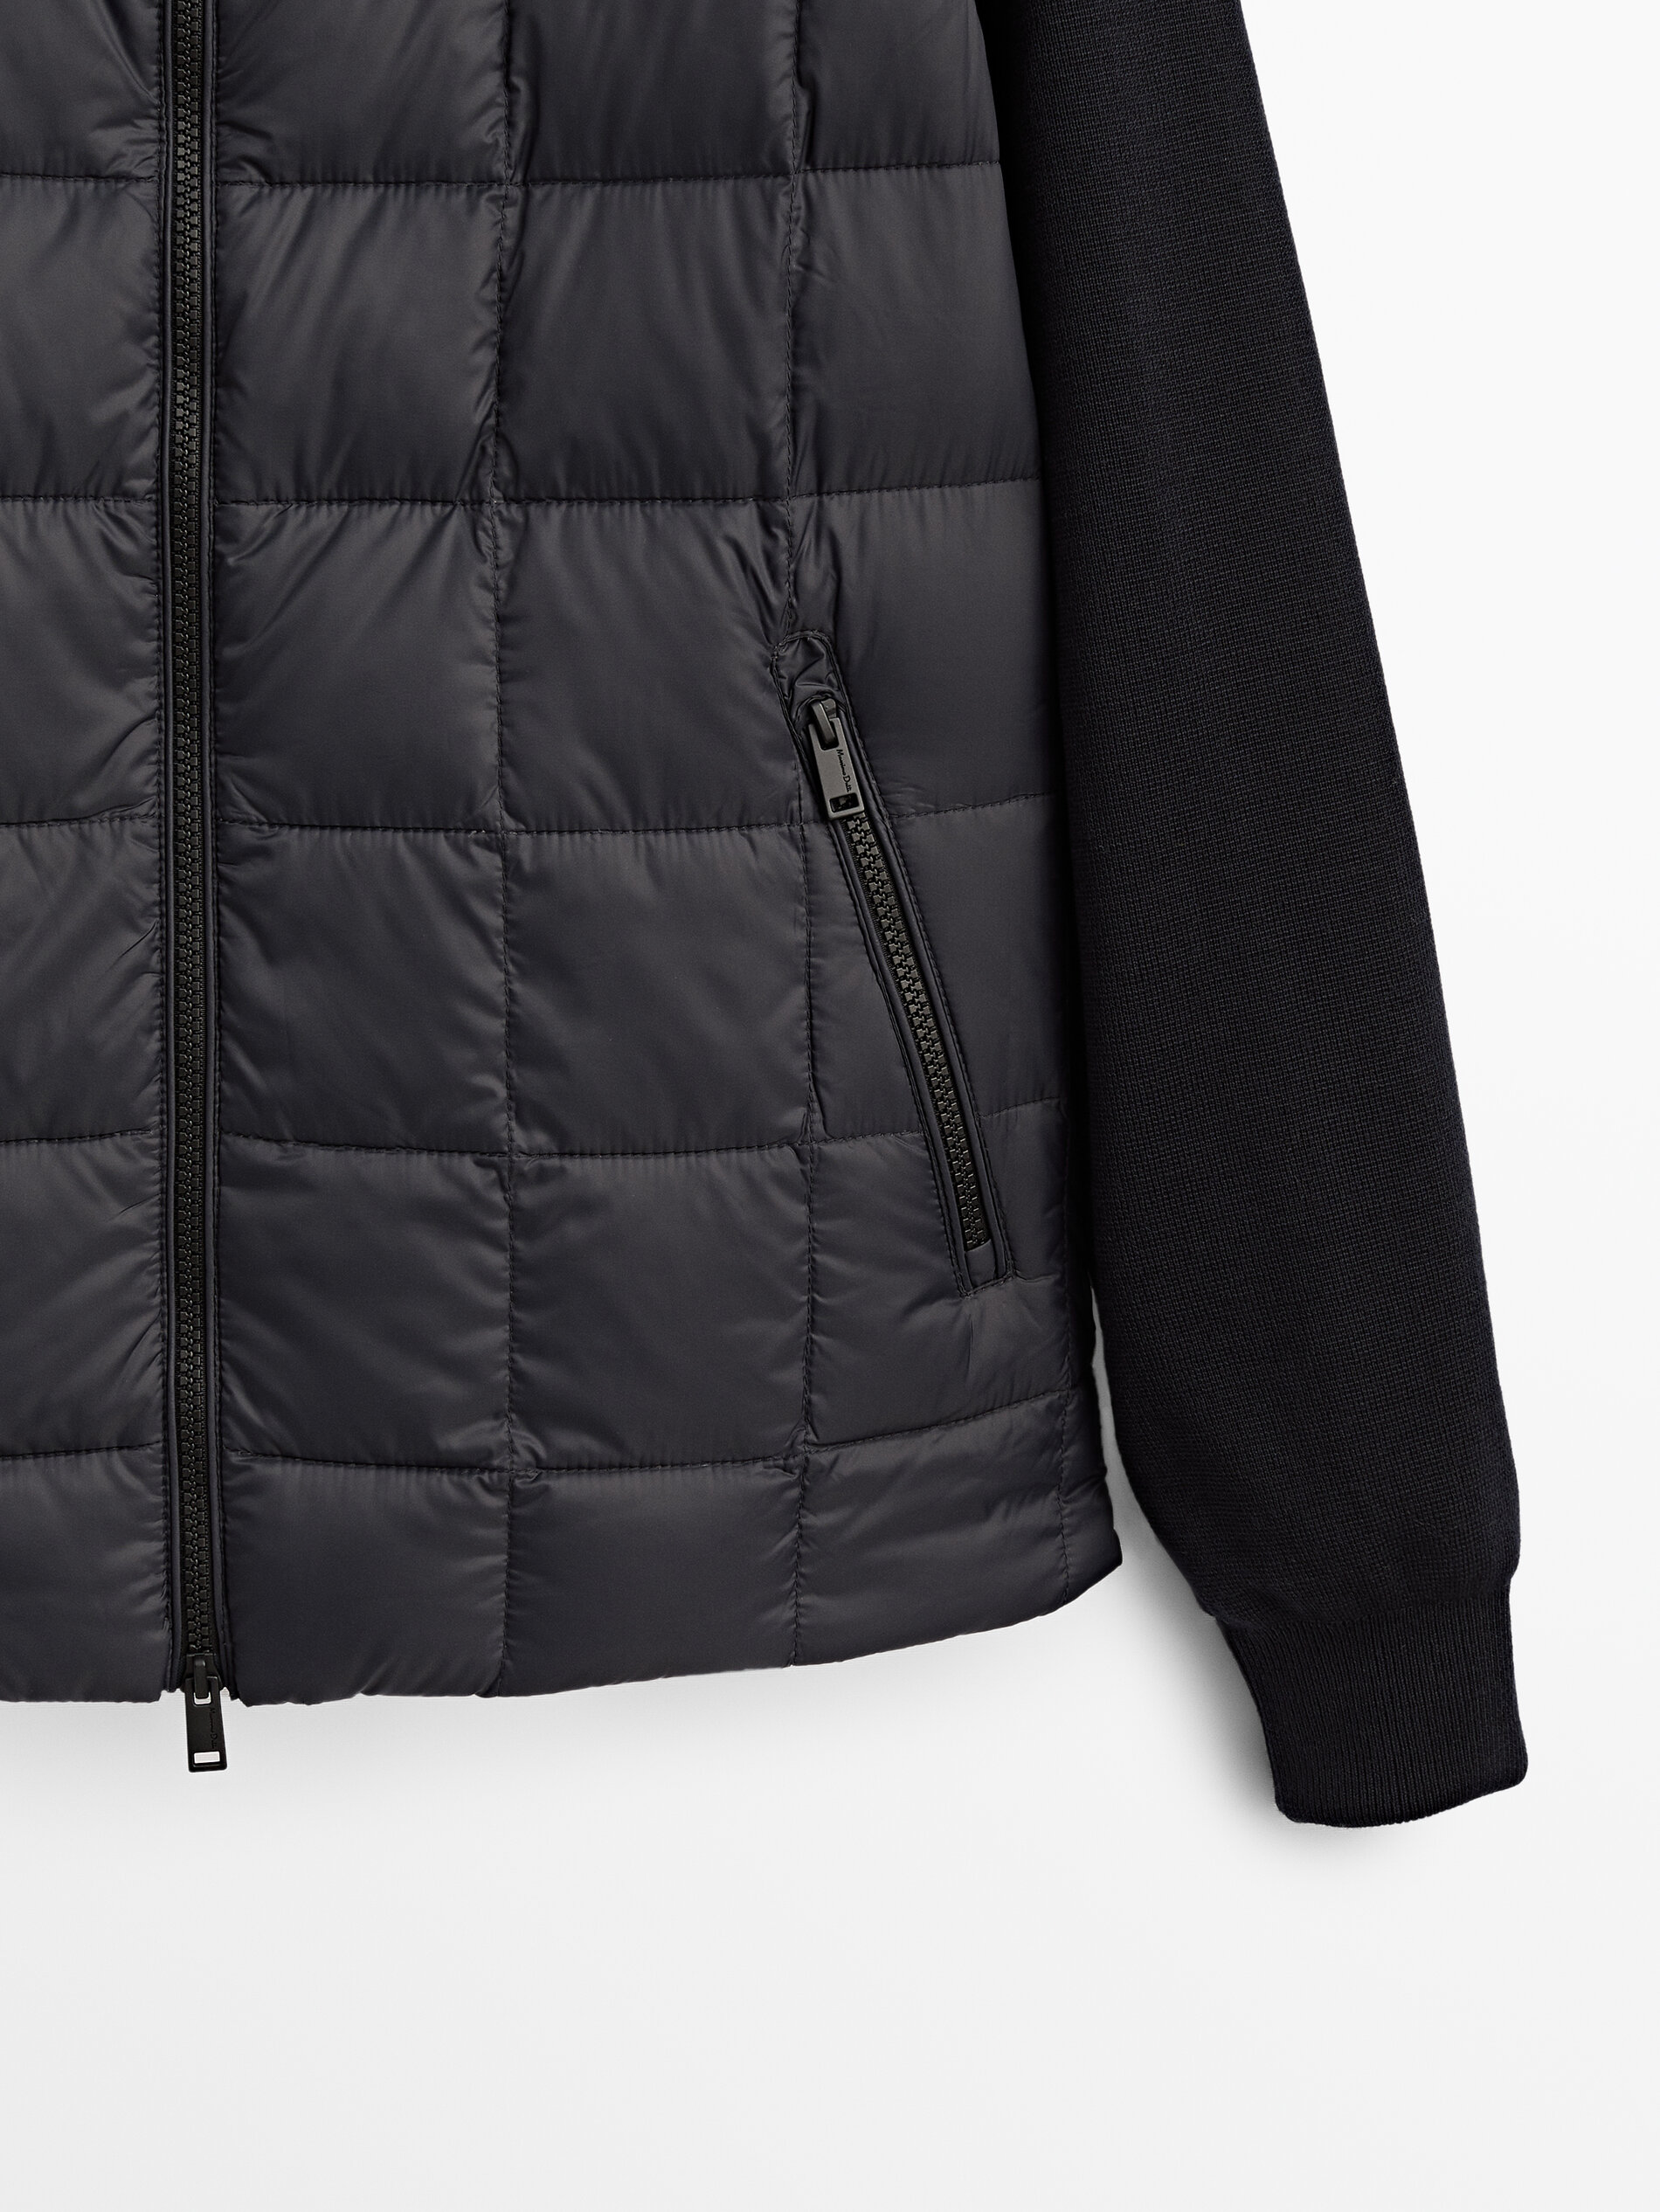 Puffer jacket with contrast knit sleeves